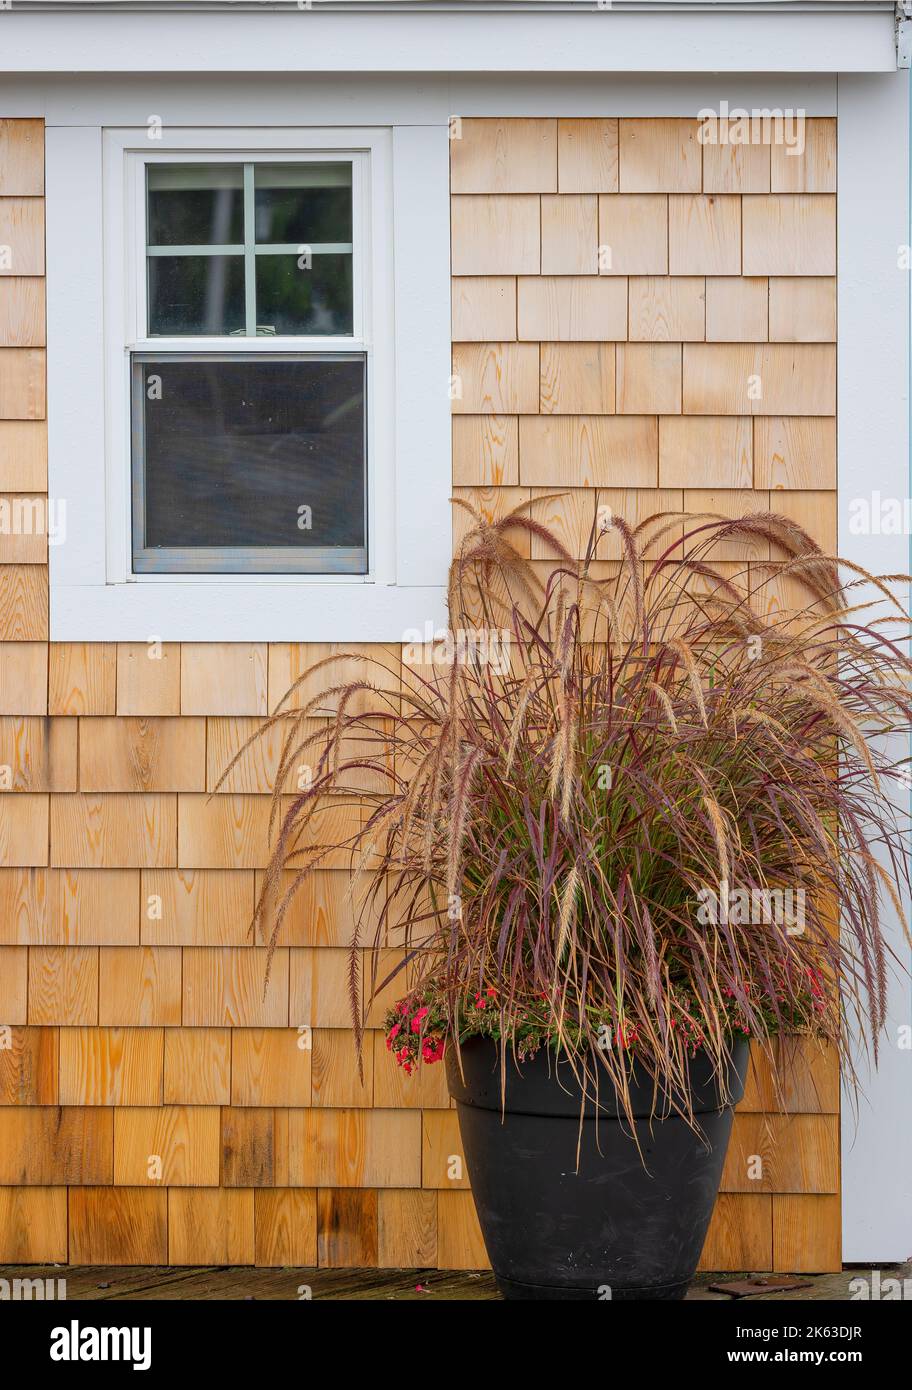 Grass plant in a flower pot stands against a cedar siding exterior wall of a building. Stock Photo